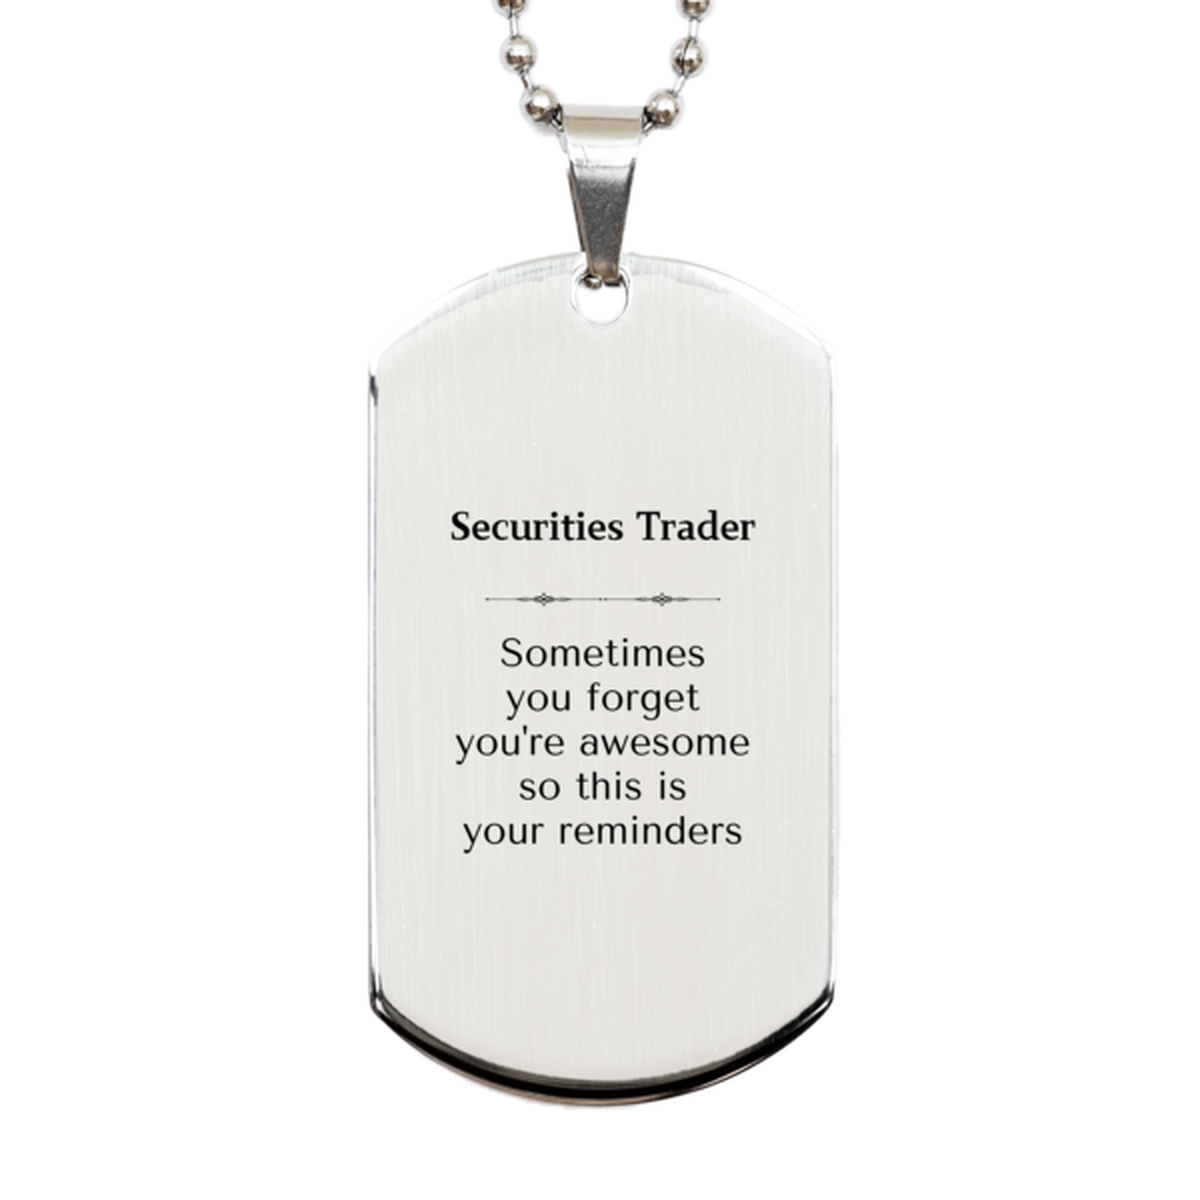 Sentimental Securities Trader Silver Dog Tag, Securities Trader Sometimes you forget you're awesome so this is your reminders, Graduation Christmas Birthday Gifts for Securities Trader, Men, Women, Coworkers